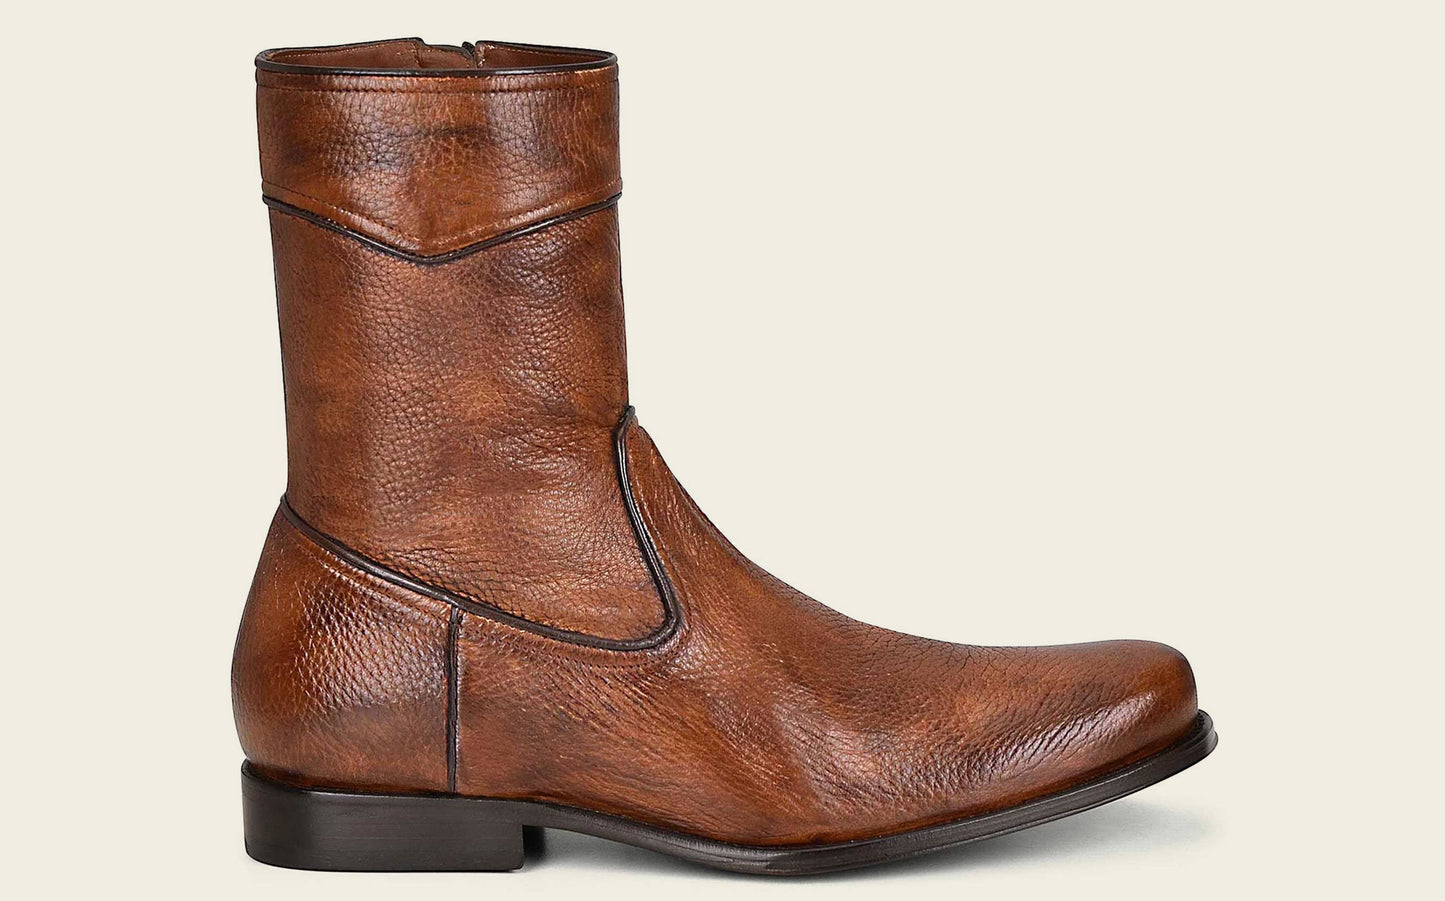 These boots are perfect for various occasions, whether it's a formal event or a stylish night out. However, it's important to note that deer leather, while exceptionally soft and elegant, is sensitive and not intended for rough use.